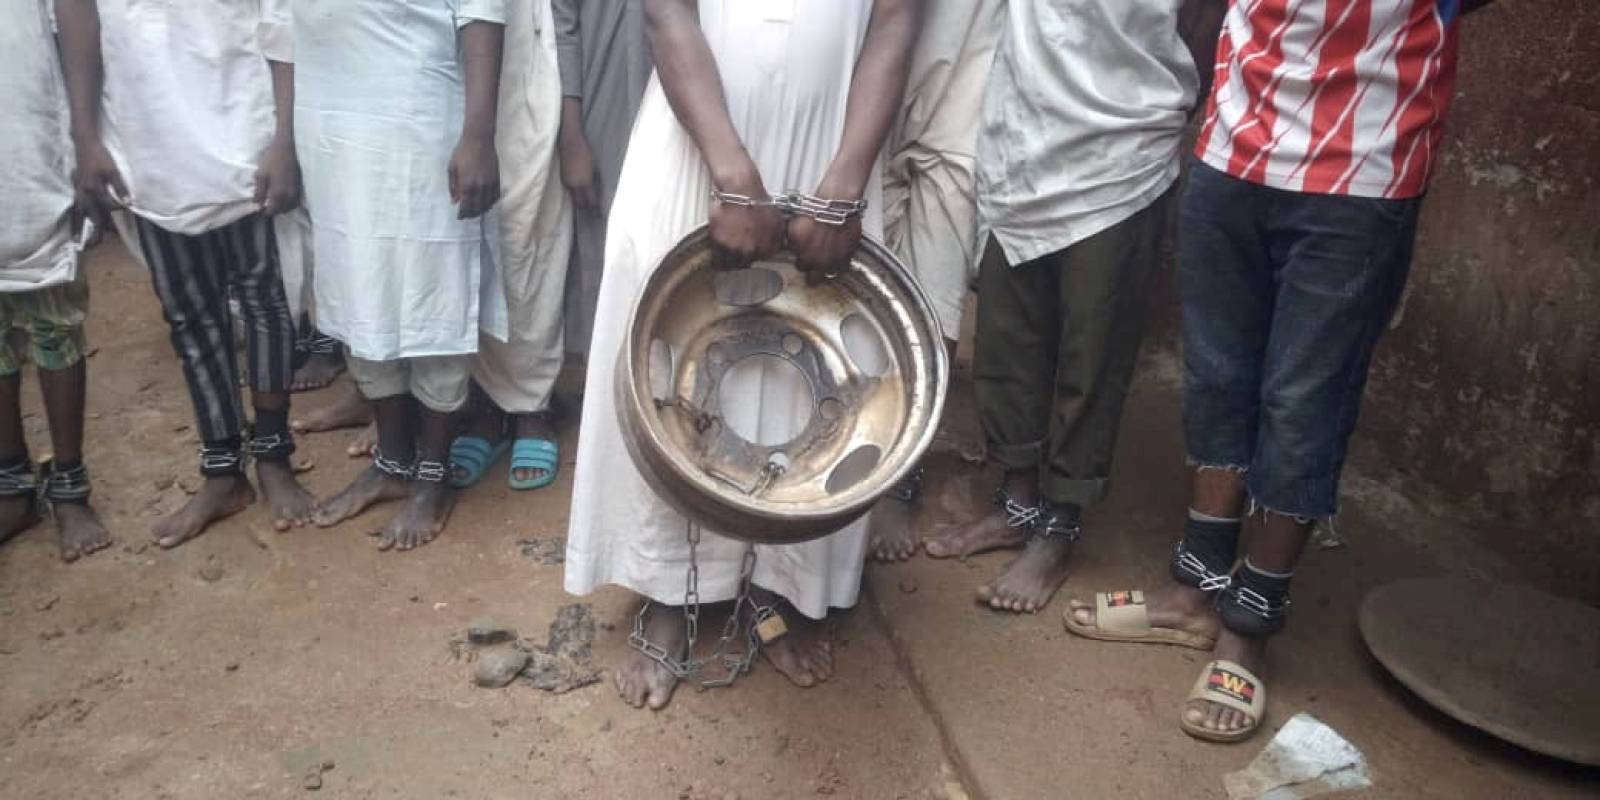 A handout picture from police shows people tied and chained after police raided a house freeing men and boys in Kaduna